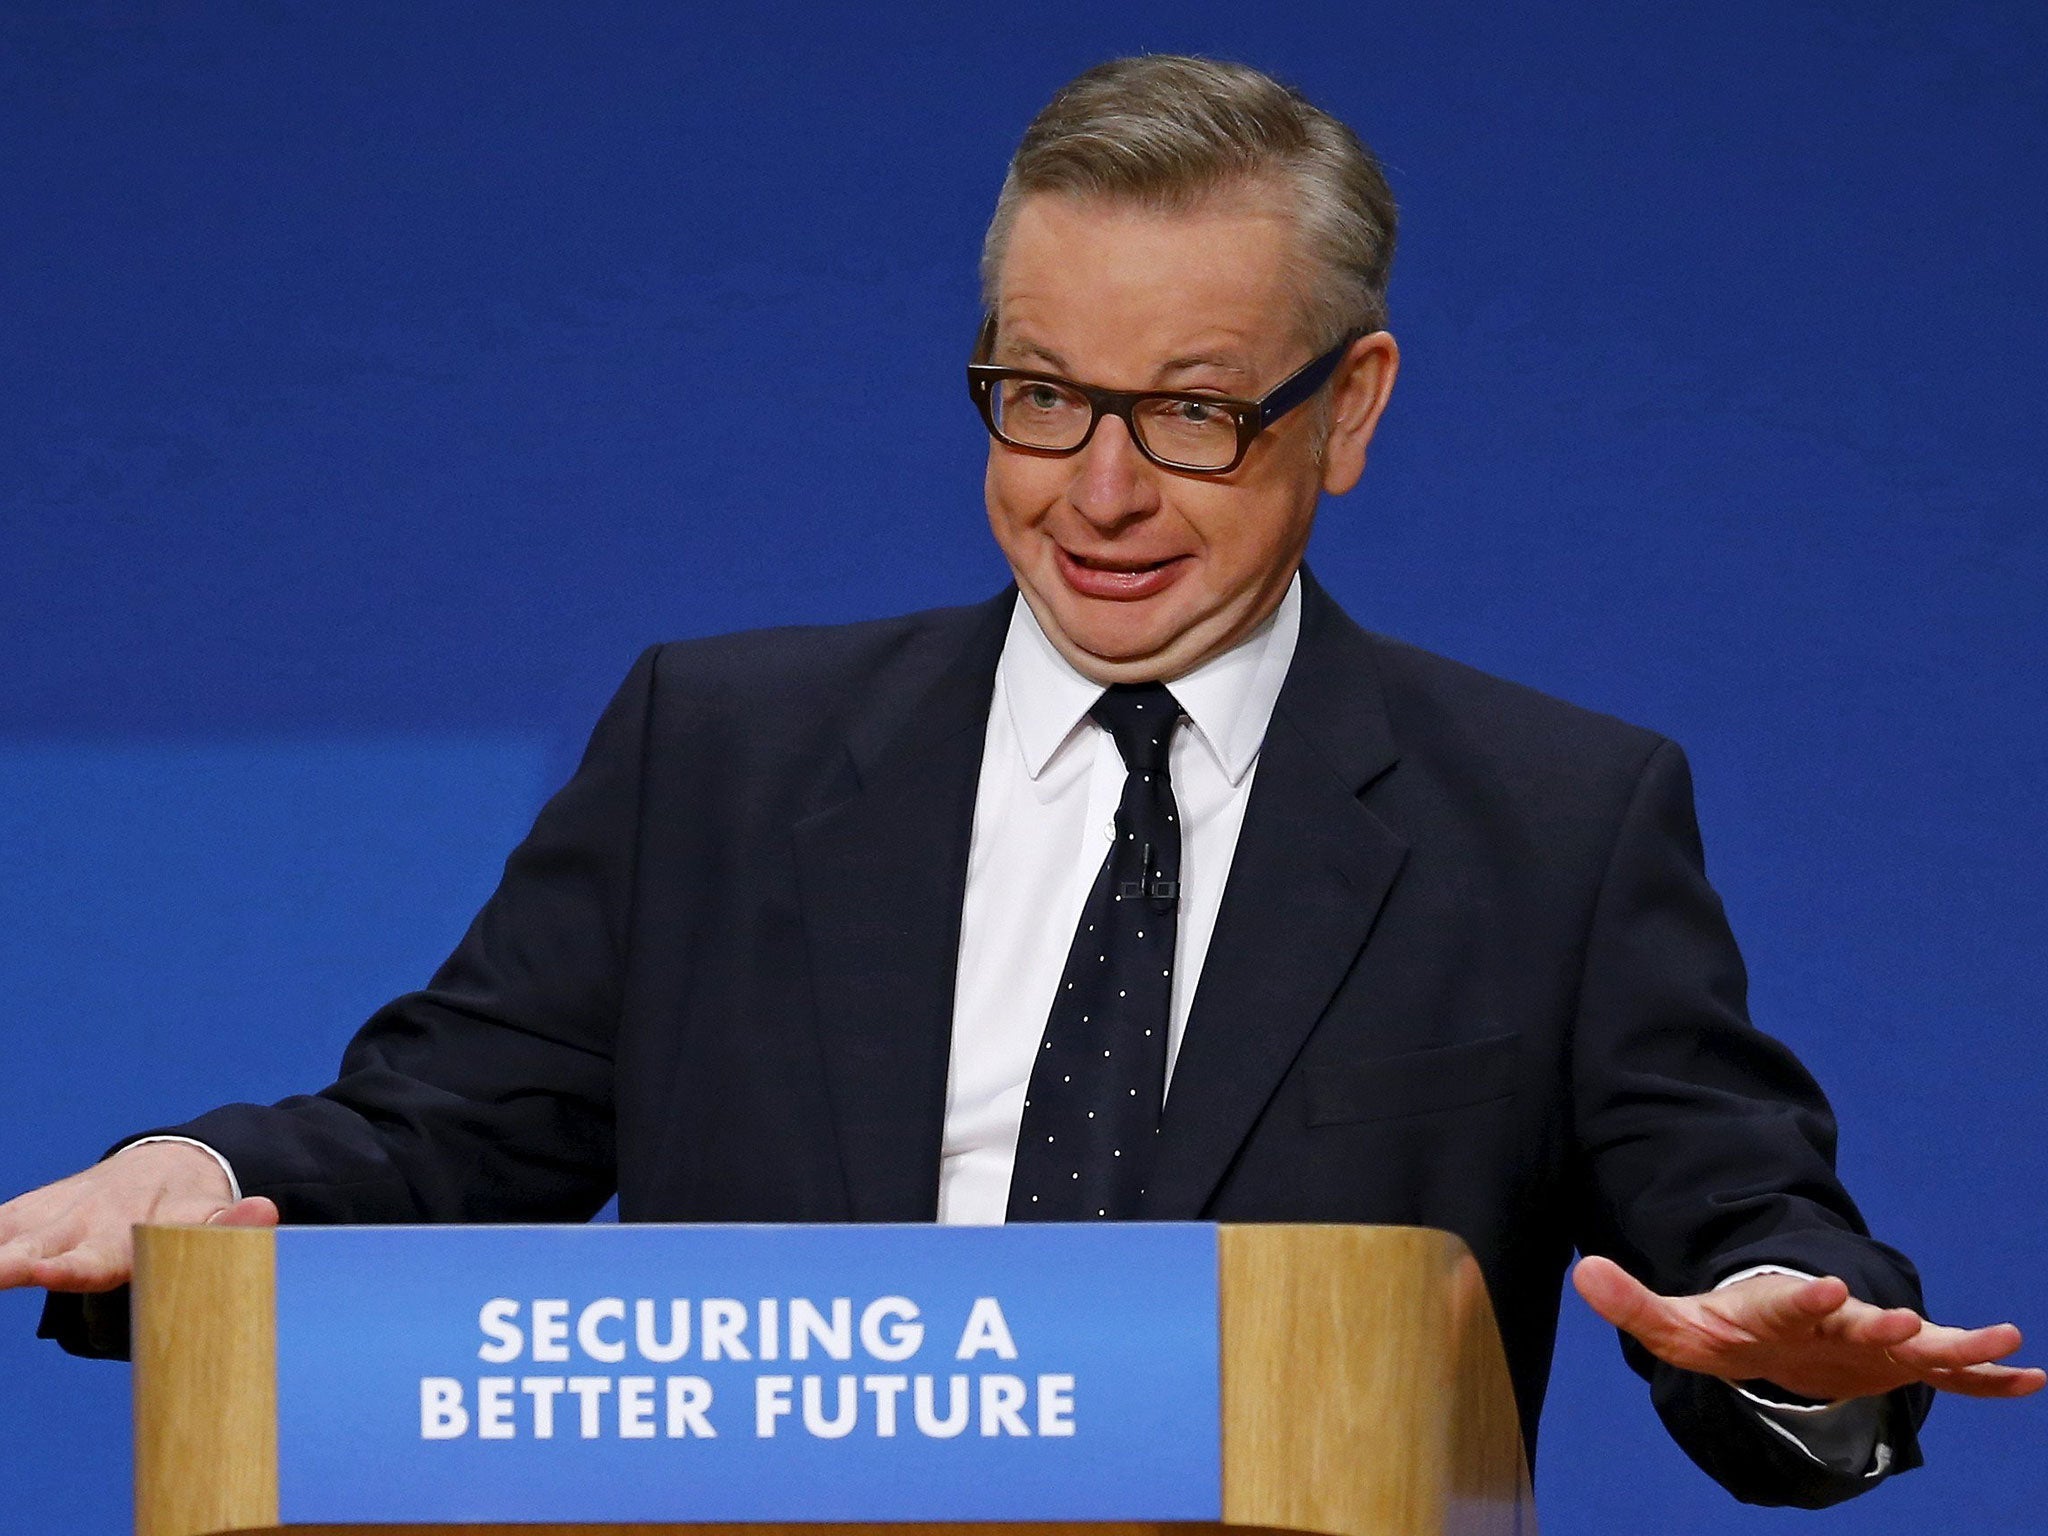 Michael Gove is set to back the Out campaign